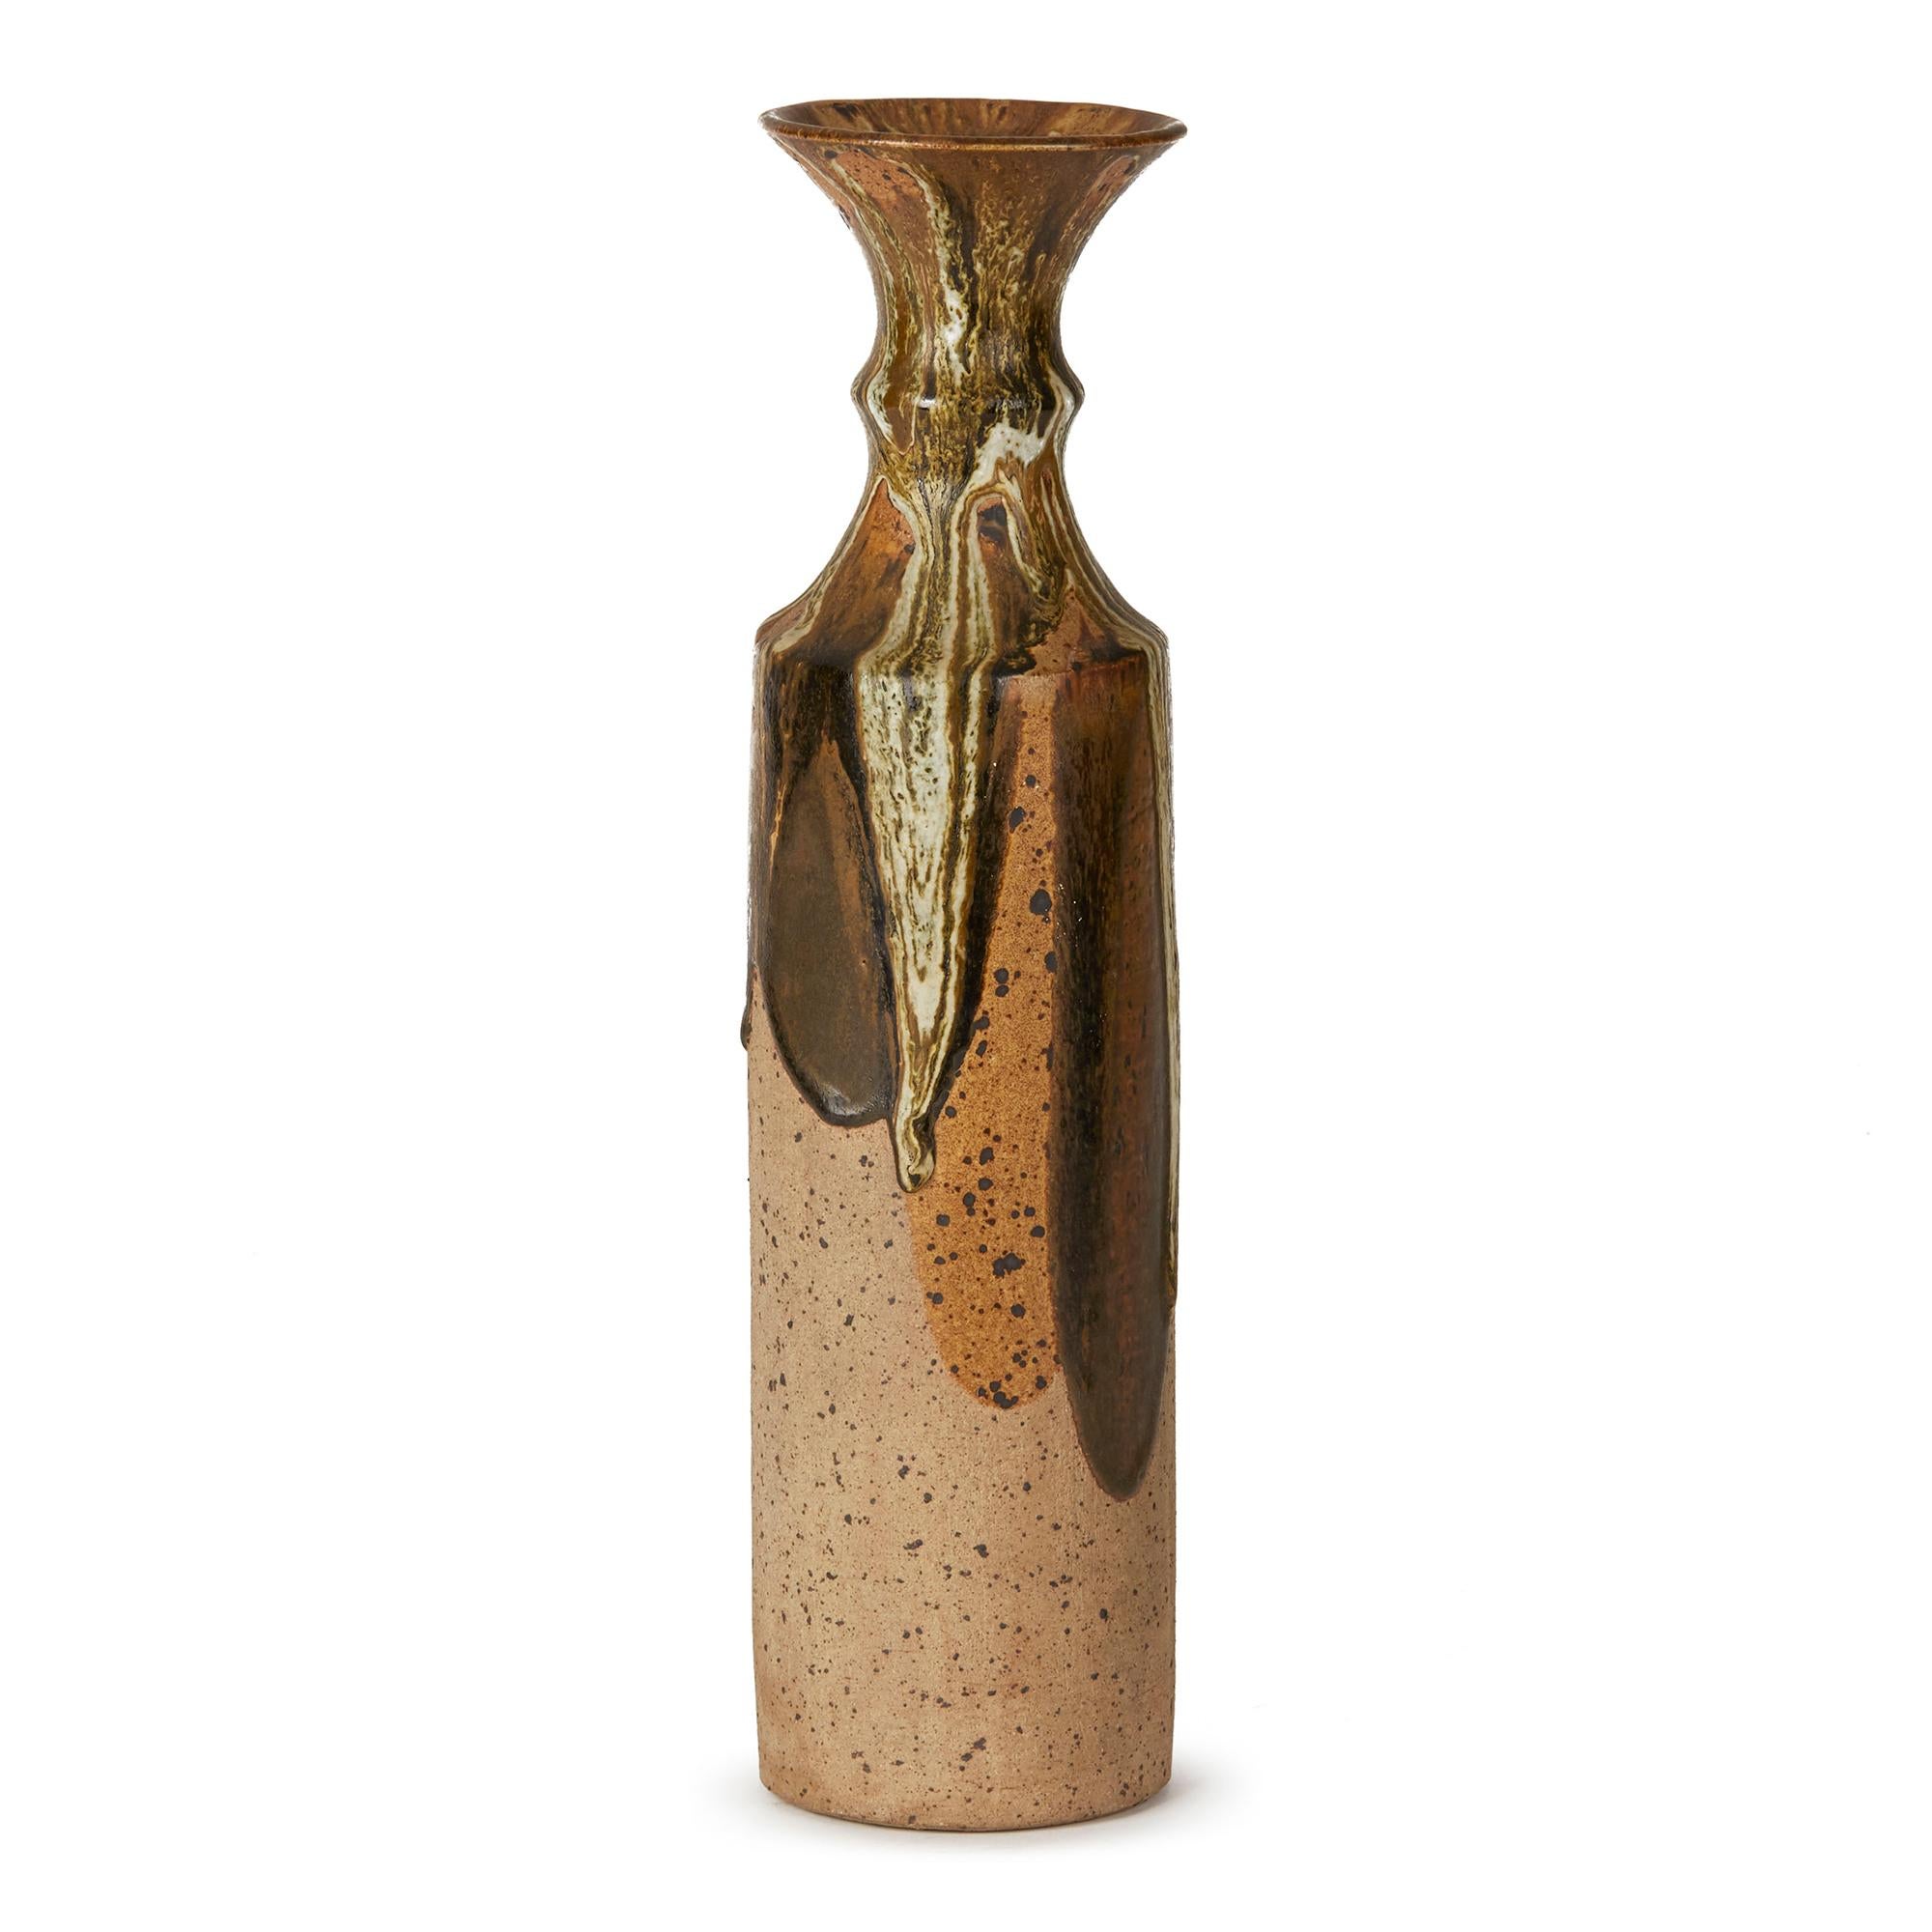 A large and impressive studio pottery stoneware vase of tall bottle shape with heaped and piled coloured drip glazes run down the body of the vase over brown glazed panels set with an unglazed ground. The vase has a trumpet shaped top and has two